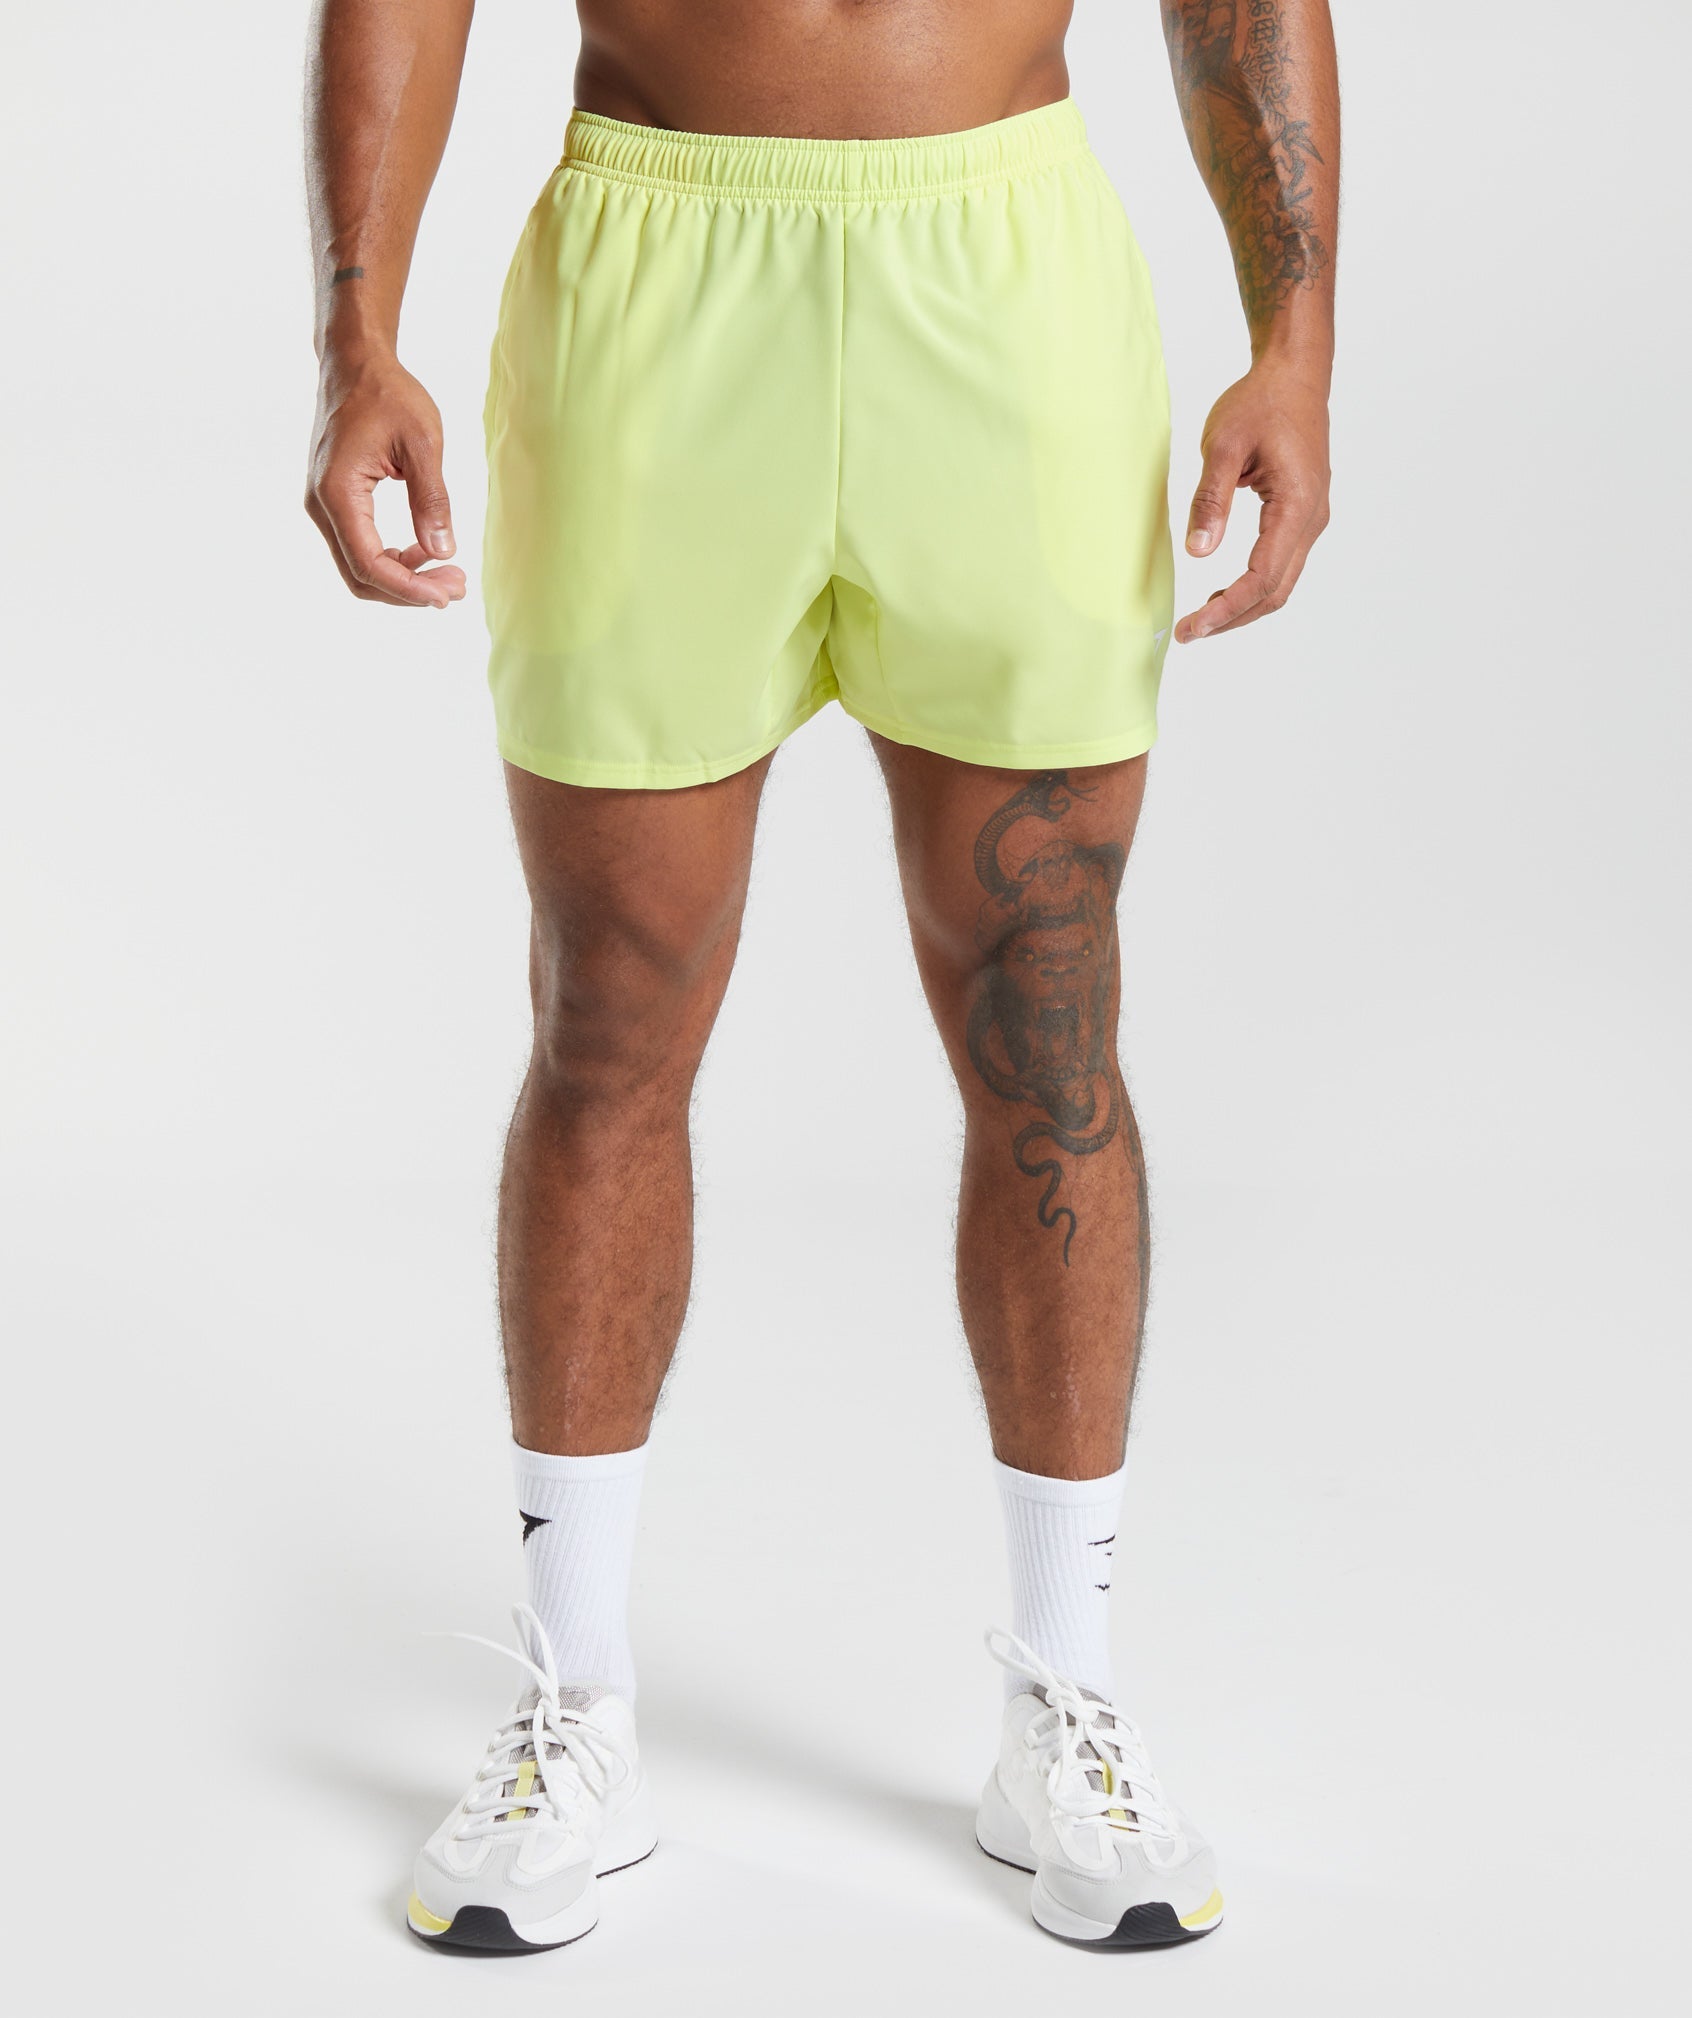 Arrival 5" Shorts in {{variantColor} is out of stock